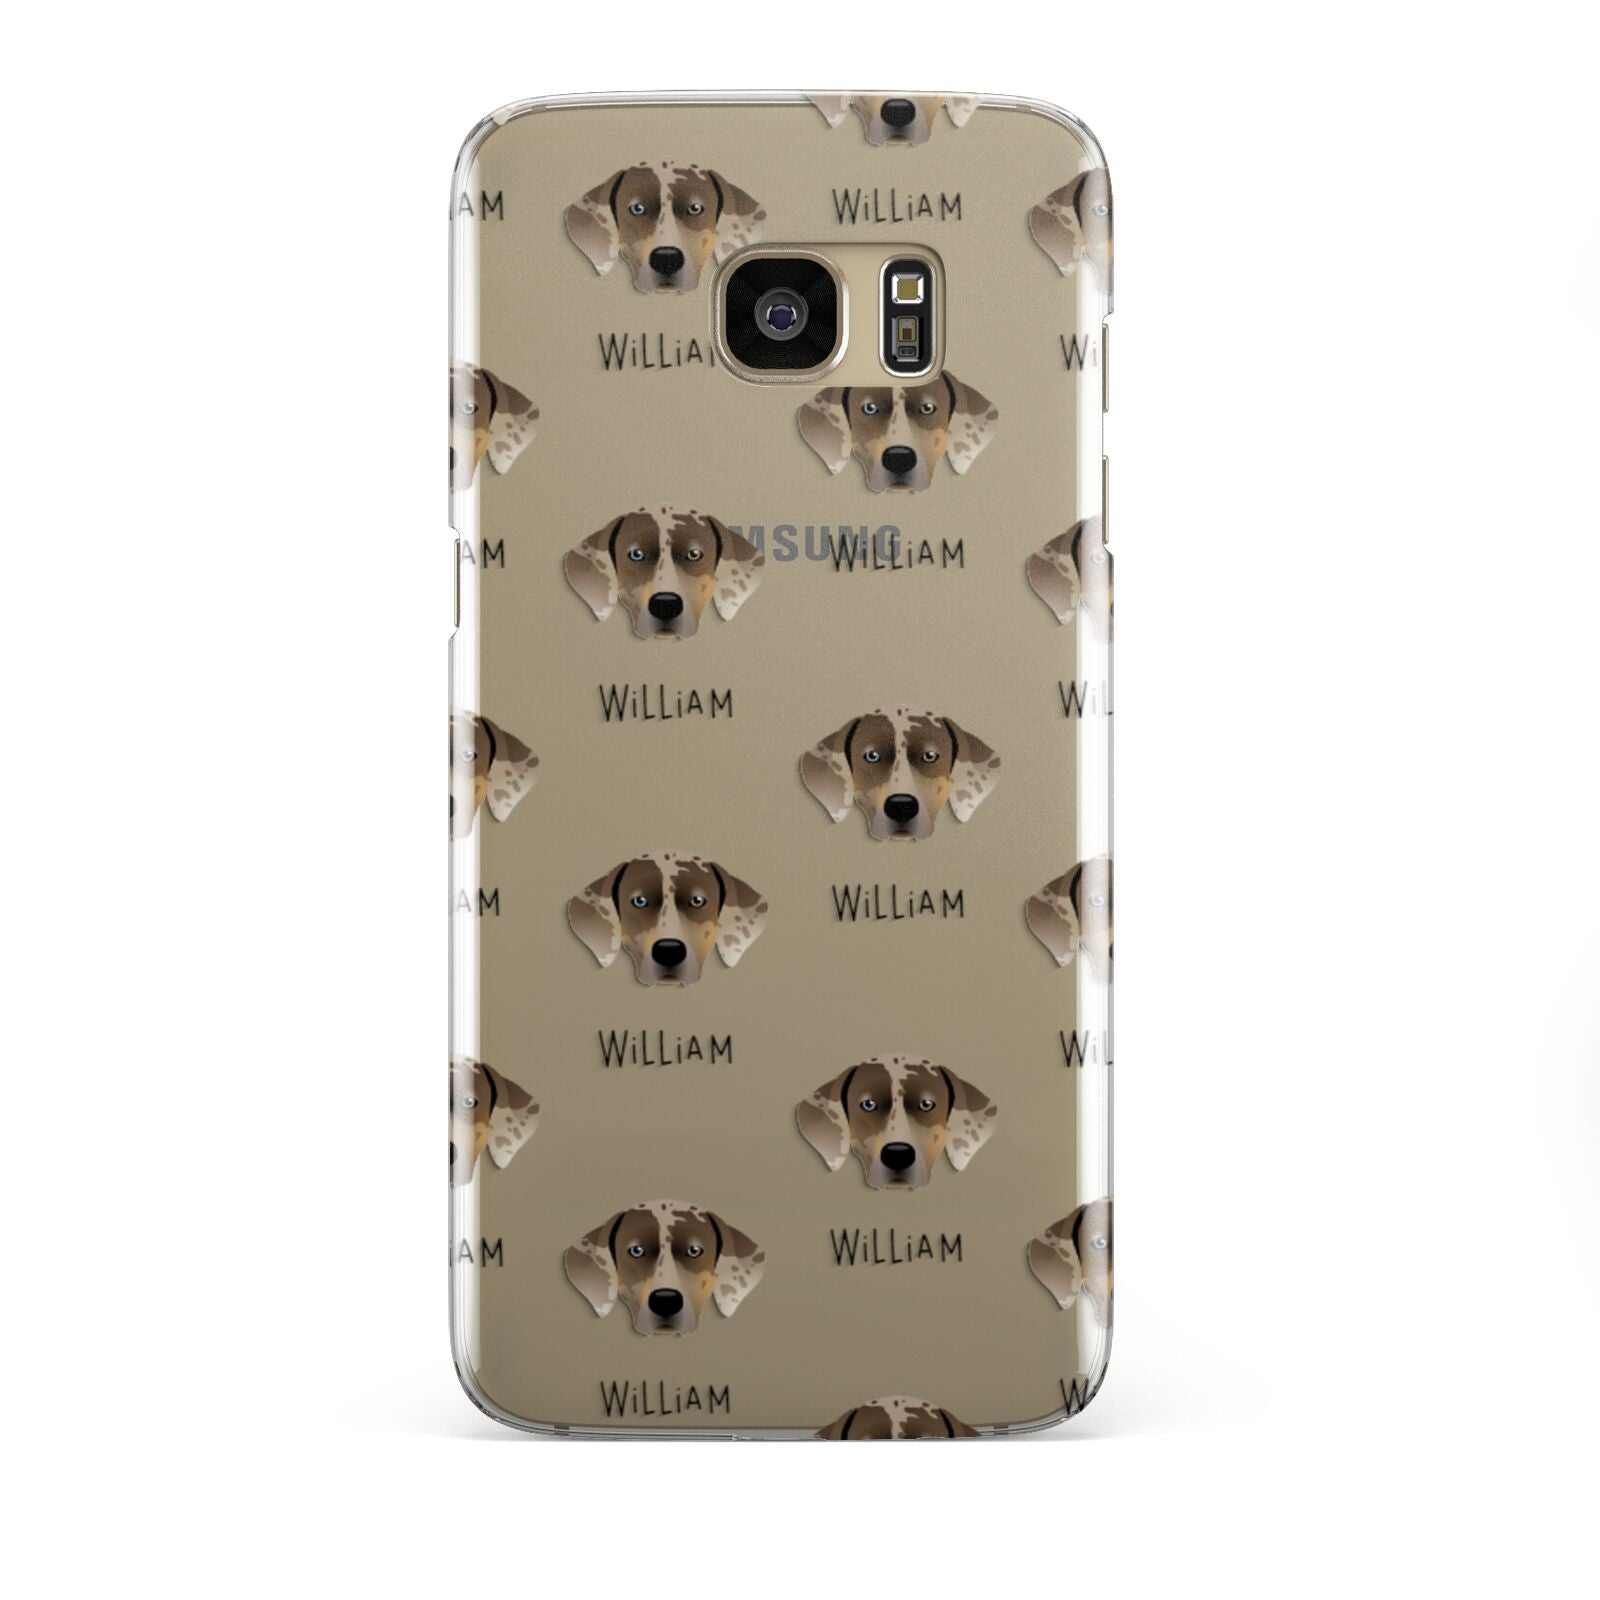 Catahoula Leopard Dog Icon with Name Samsung Galaxy S7 Edge Case